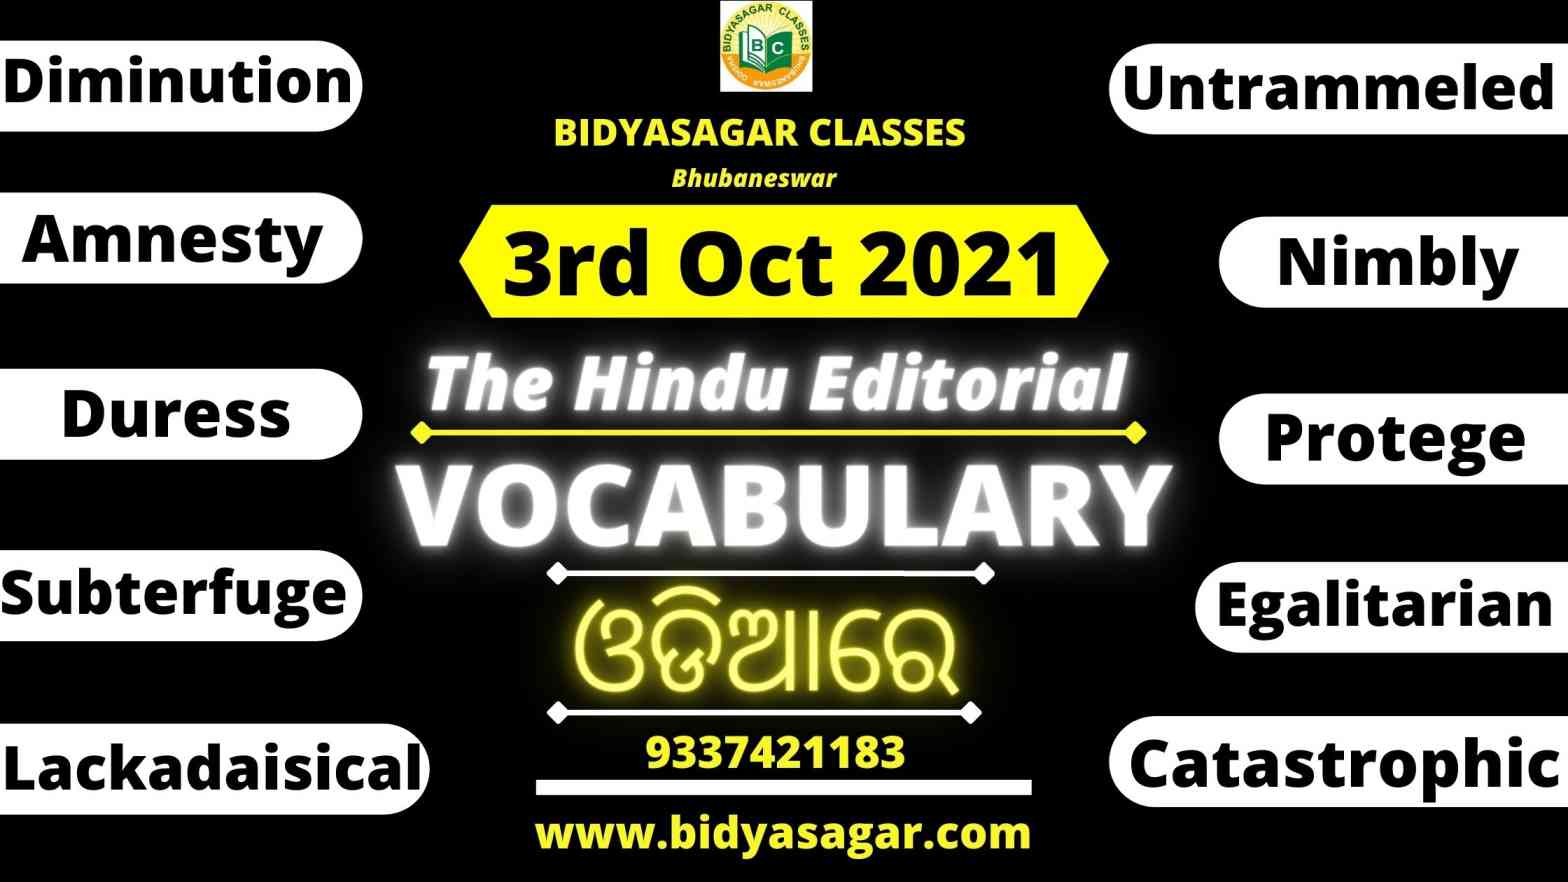 The Hindu Editorial Vocabulary of 4th October 2021